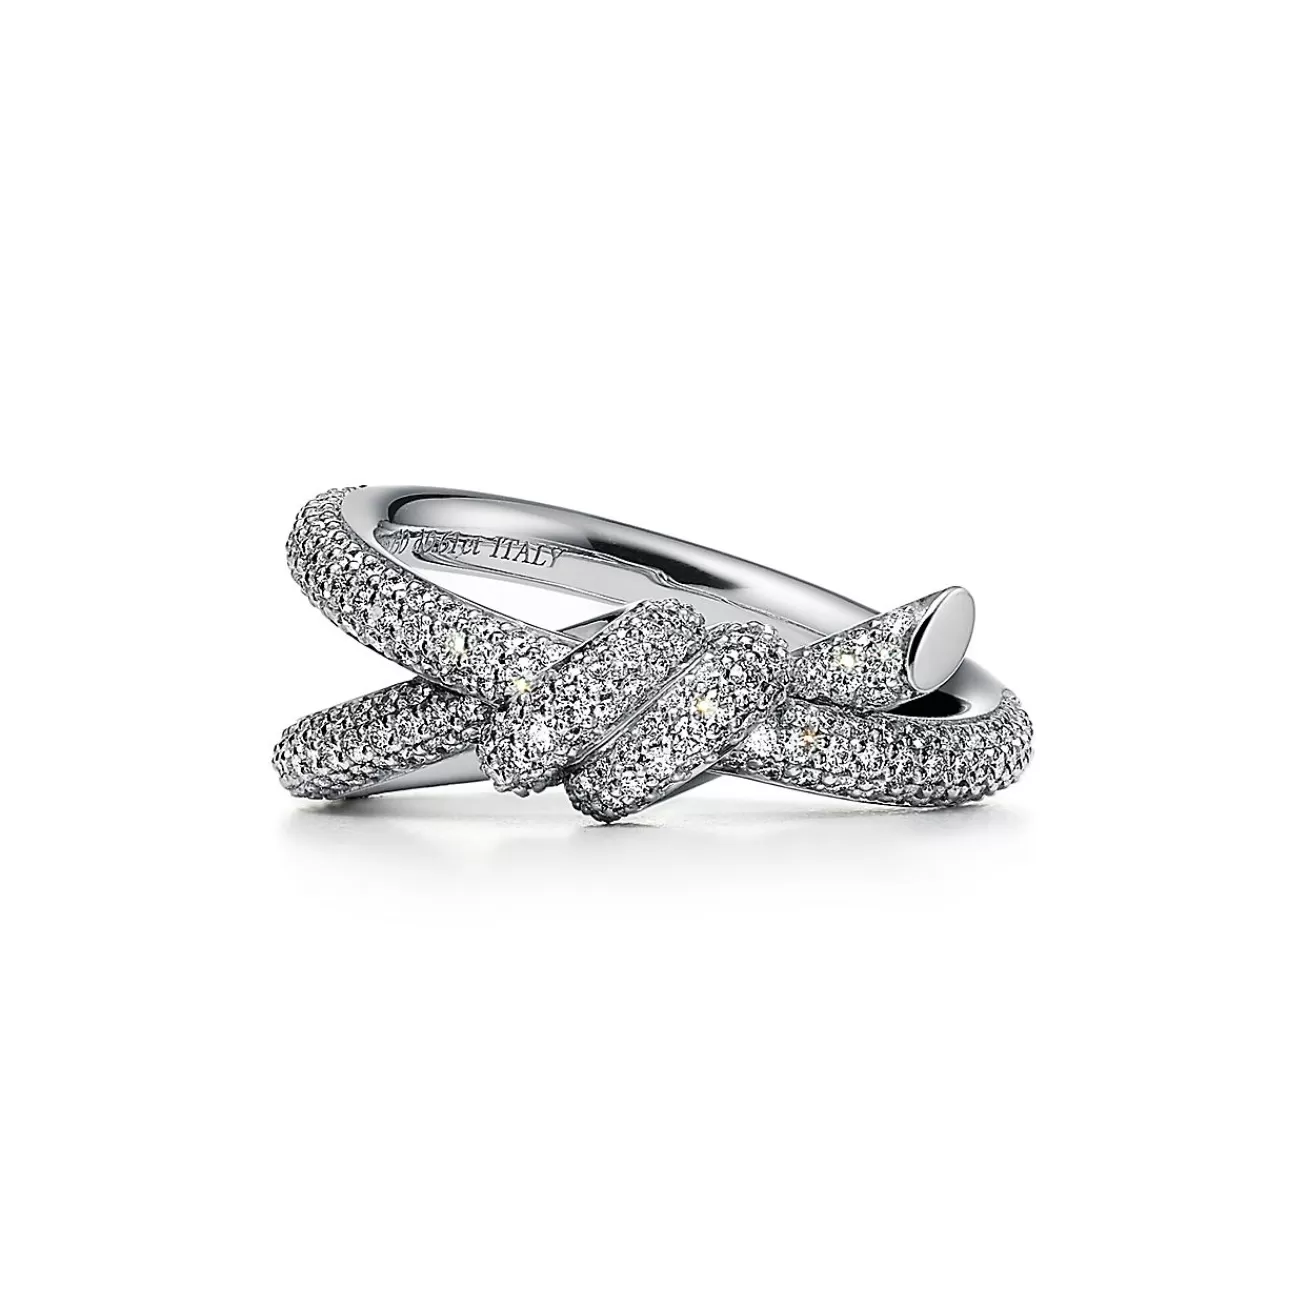 Tiffany & Co. Tiffany Knot Double Row Ring in White Gold with Diamonds | ^ Rings | Diamond Jewelry